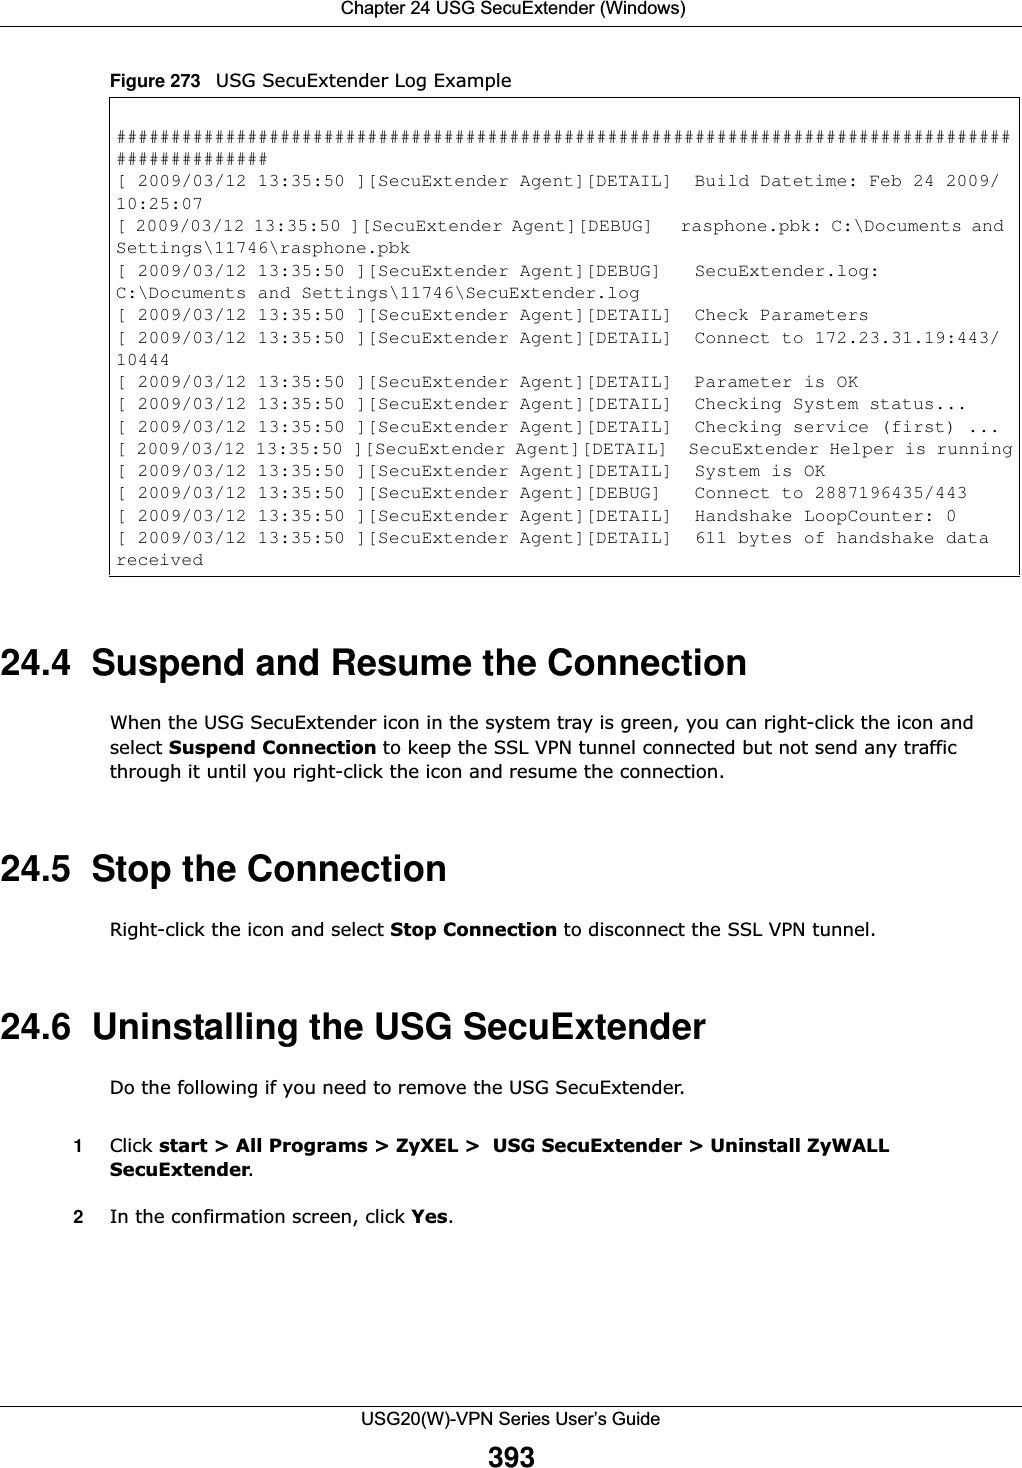  Chapter 24 USG SecuExtender (Windows)USG20(W)-VPN Series User’s Guide393Figure 273   USG SecuExtender Log Example 24.4  Suspend and Resume the ConnectionWhen the USG SecuExtender icon in the system tray is green, you can right-click the icon and select Suspend Connection to keep the SSL VPN tunnel connected but not send any traffic through it until you right-click the icon and resume the connection.24.5  Stop the ConnectionRight-click the icon and select Stop Connection to disconnect the SSL VPN tunnel. 24.6  Uninstalling the USG SecuExtenderDo the following if you need to remove the USG SecuExtender.1Click start &gt; All Programs &gt; ZyXEL &gt;  USG SecuExtender &gt; Uninstall ZyWALL SecuExtender.2In the confirmation screen, click Yes.################################################################################################[ 2009/03/12 13:35:50 ][SecuExtender Agent][DETAIL]  Build Datetime: Feb 24 2009/10:25:07[ 2009/03/12 13:35:50 ][SecuExtender Agent][DEBUG]   rasphone.pbk: C:\Documents and Settings\11746\rasphone.pbk[ 2009/03/12 13:35:50 ][SecuExtender Agent][DEBUG]   SecuExtender.log: C:\Documents and Settings\11746\SecuExtender.log[ 2009/03/12 13:35:50 ][SecuExtender Agent][DETAIL]  Check Parameters[ 2009/03/12 13:35:50 ][SecuExtender Agent][DETAIL]  Connect to 172.23.31.19:443/10444[ 2009/03/12 13:35:50 ][SecuExtender Agent][DETAIL]  Parameter is OK[ 2009/03/12 13:35:50 ][SecuExtender Agent][DETAIL]  Checking System status...[ 2009/03/12 13:35:50 ][SecuExtender Agent][DETAIL]  Checking service (first) ...[ 2009/03/12 13:35:50 ][SecuExtender Agent][DETAIL]  SecuExtender Helper is running[ 2009/03/12 13:35:50 ][SecuExtender Agent][DETAIL]  System is OK[ 2009/03/12 13:35:50 ][SecuExtender Agent][DEBUG]   Connect to 2887196435/443[ 2009/03/12 13:35:50 ][SecuExtender Agent][DETAIL]  Handshake LoopCounter: 0[ 2009/03/12 13:35:50 ][SecuExtender Agent][DETAIL]  611 bytes of handshake data received